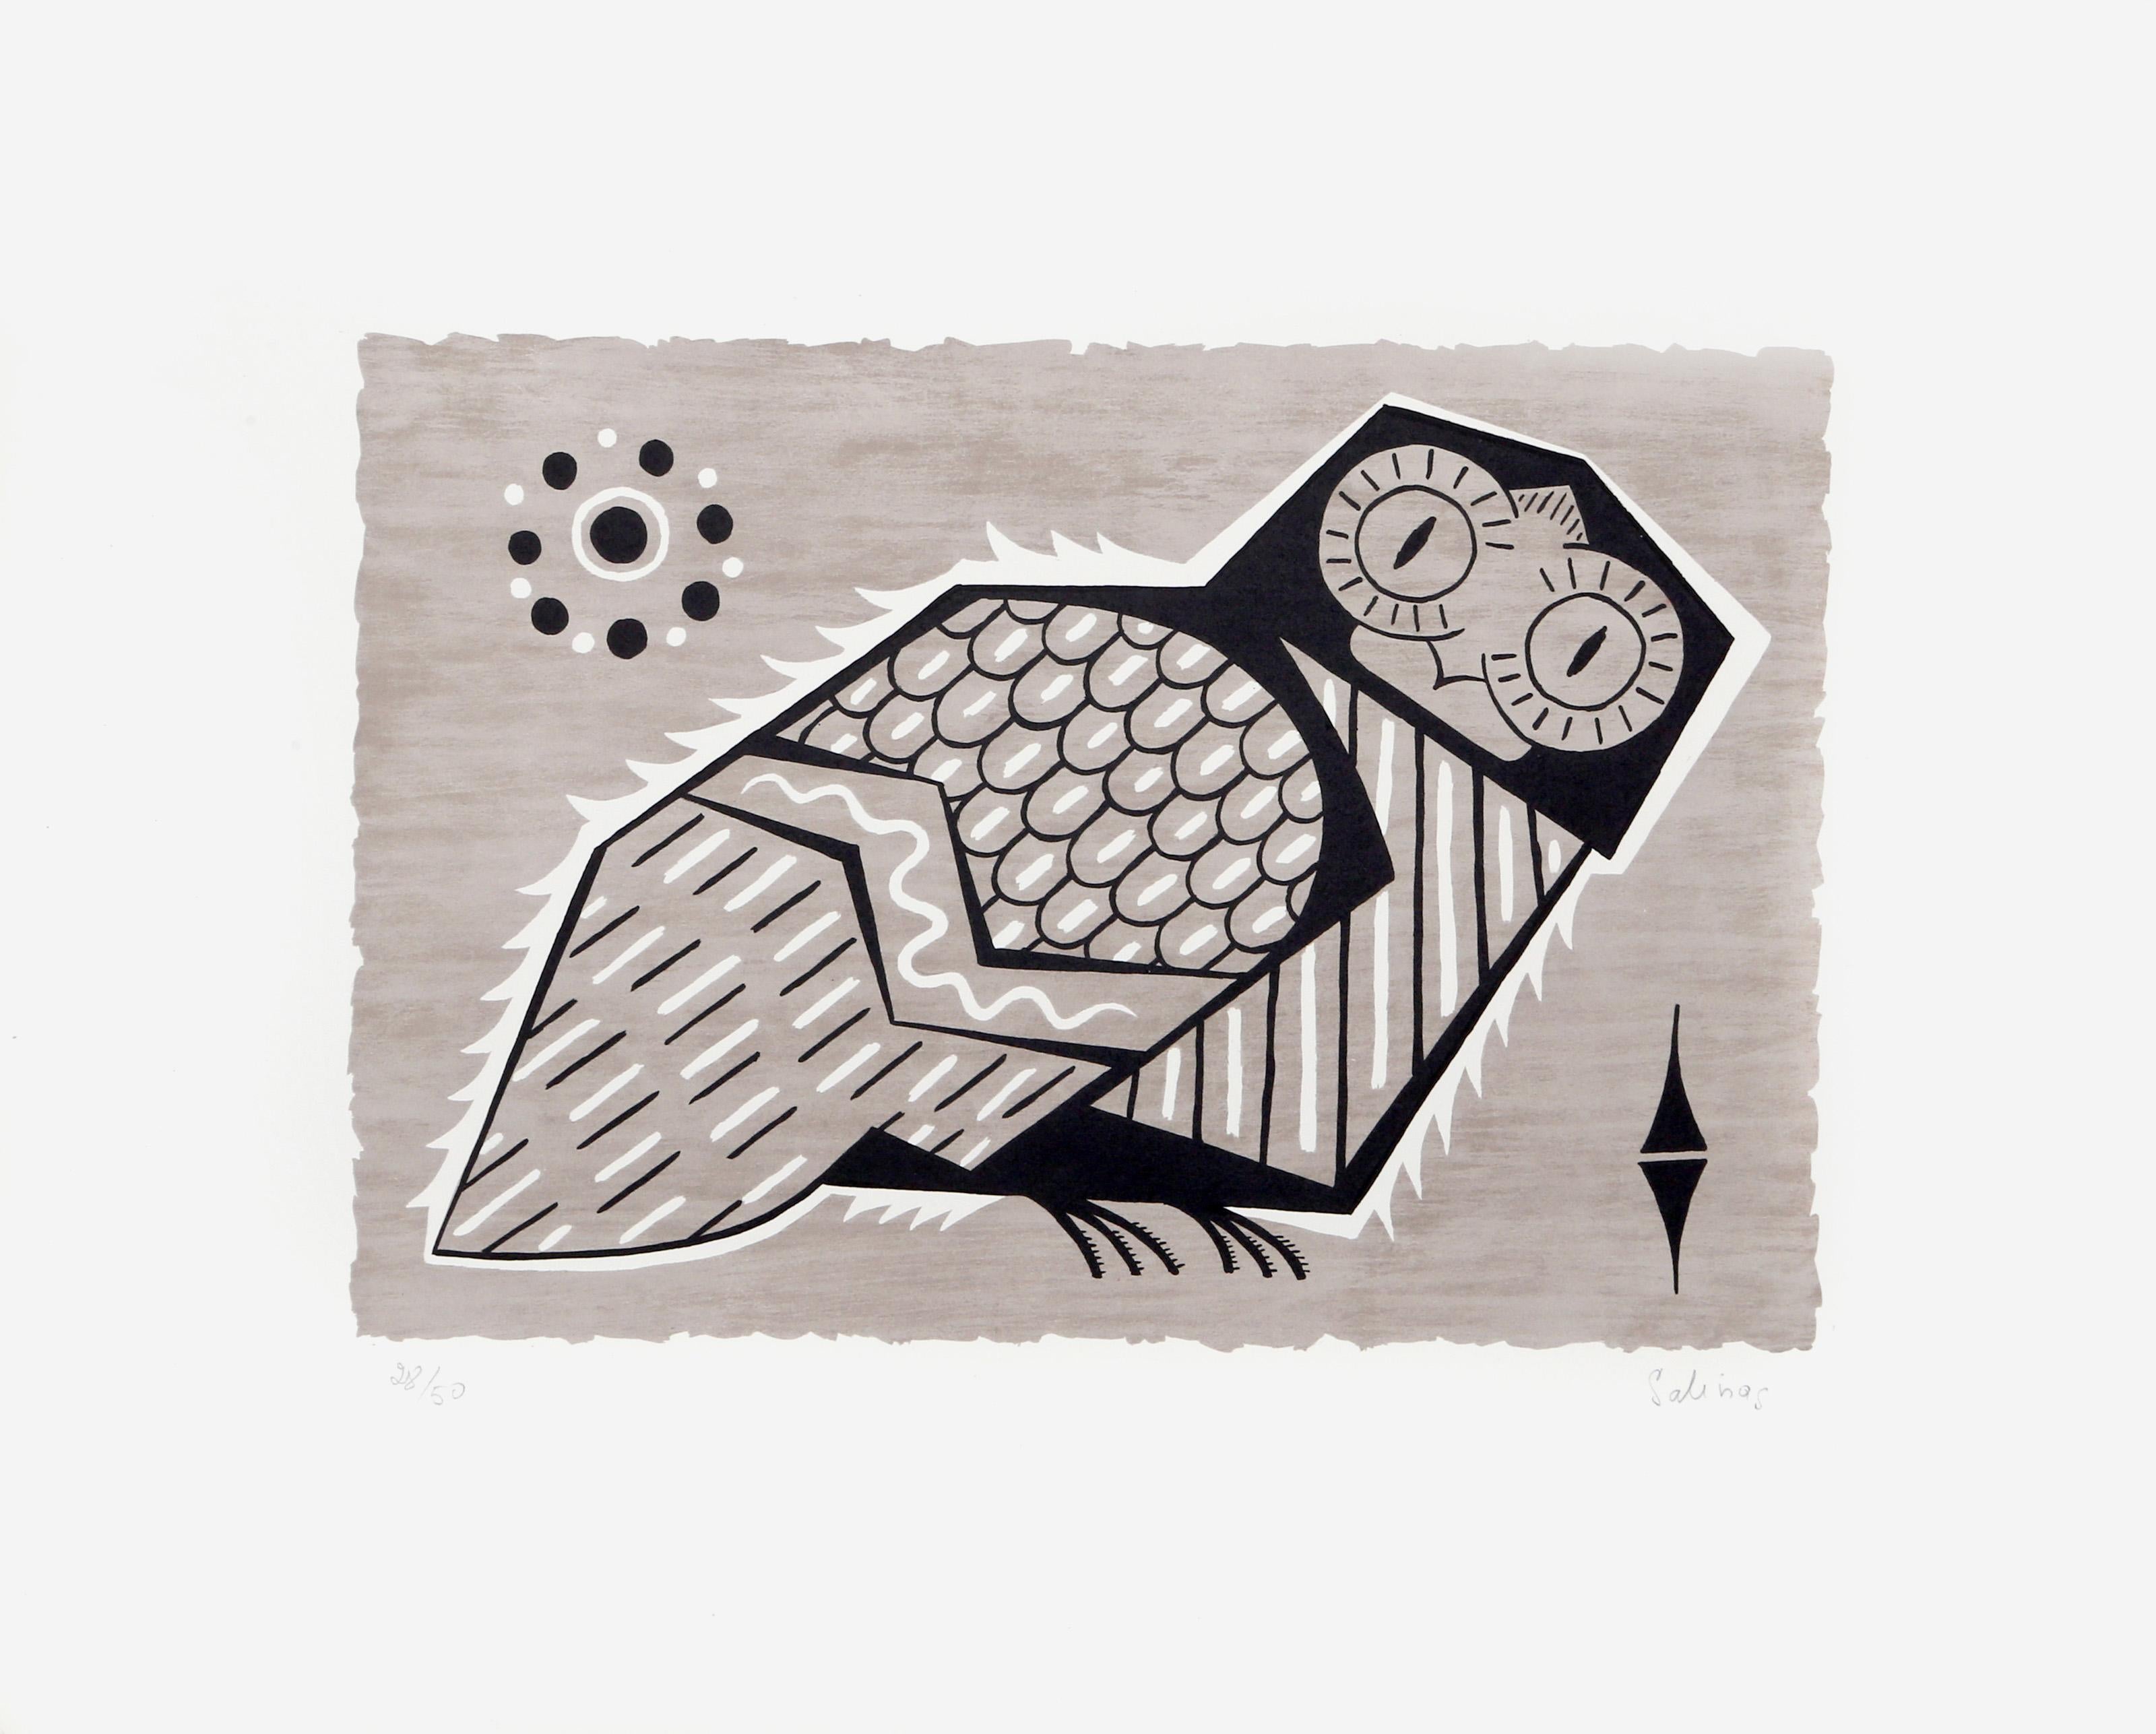 Laurent Marcel Salinas, Egyptian/French (1913 - 2010) -  Owl. Year: circa 1970, Medium: Lithograph, signed and numbered in pencil, Edition: 50, Image Size: 10 x 15 inches, Size: 17.5  x 22 in. (44.45  x 55.88 cm) 